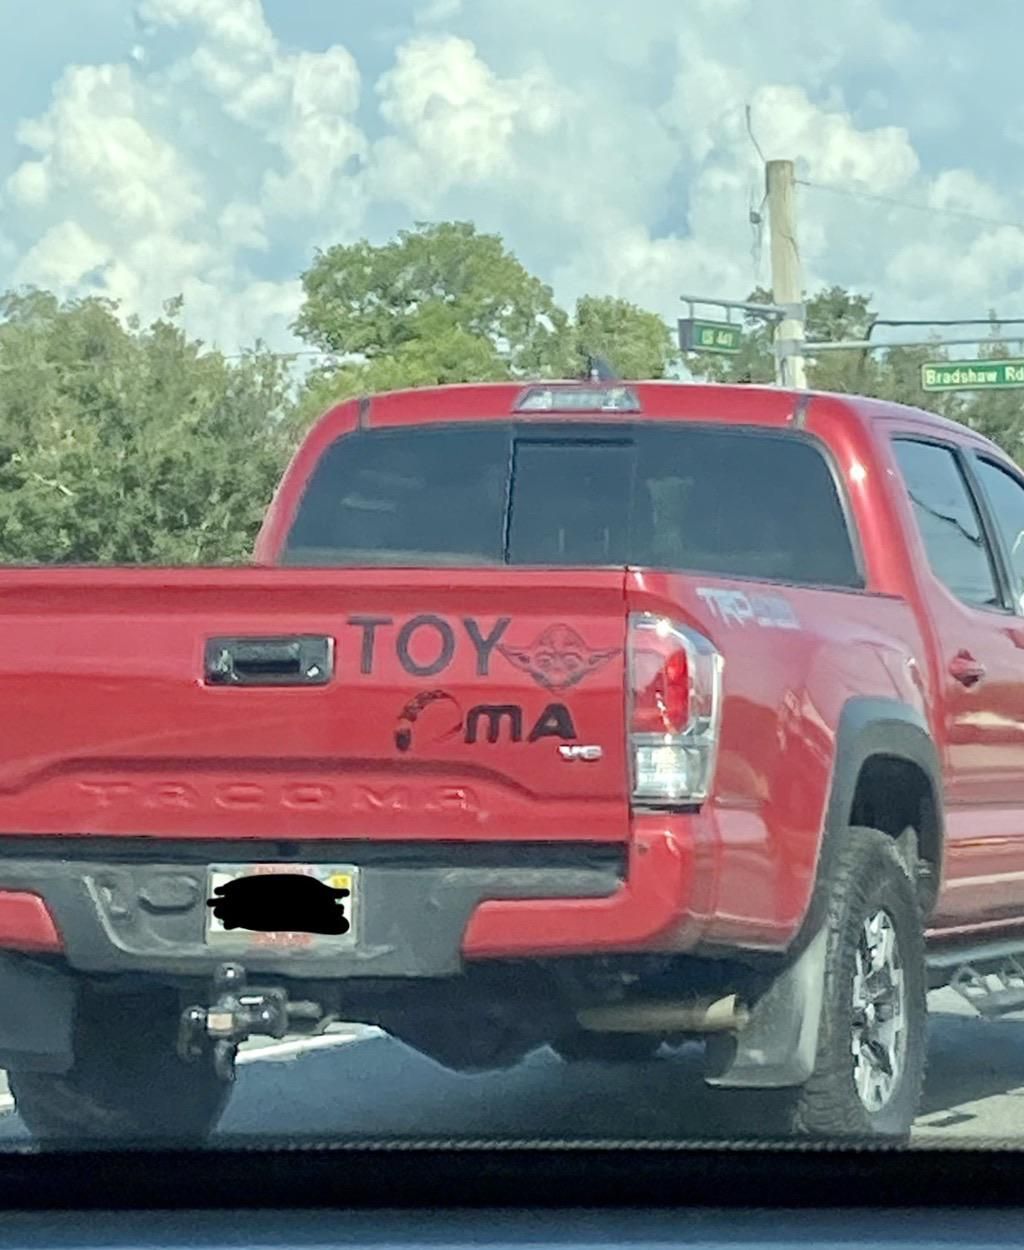 Drove past this truck on my way back from Taco Tuesday today